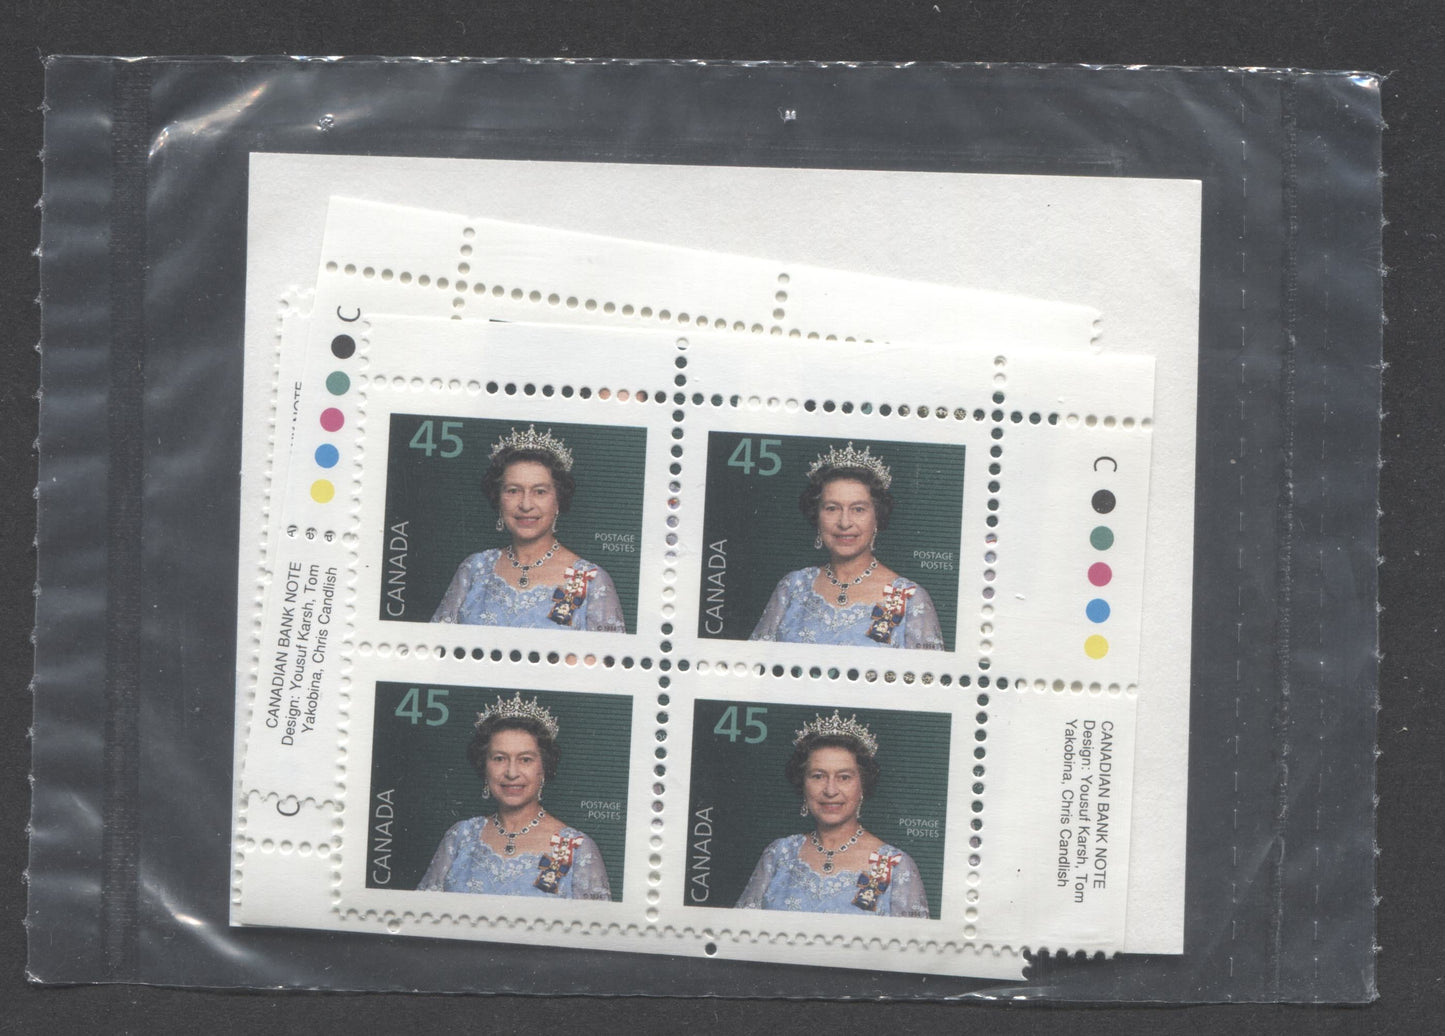 Lot 41 Canada #1360 45c Multicoloured 1995 Domestic First-Class Rate Issue, Canada Post Sealed Pack of Inscription Blocks, CBN Printing On DF CPP Paper, With HB Type 6C Insert Card, VFNH, Unitrade Cat. $20